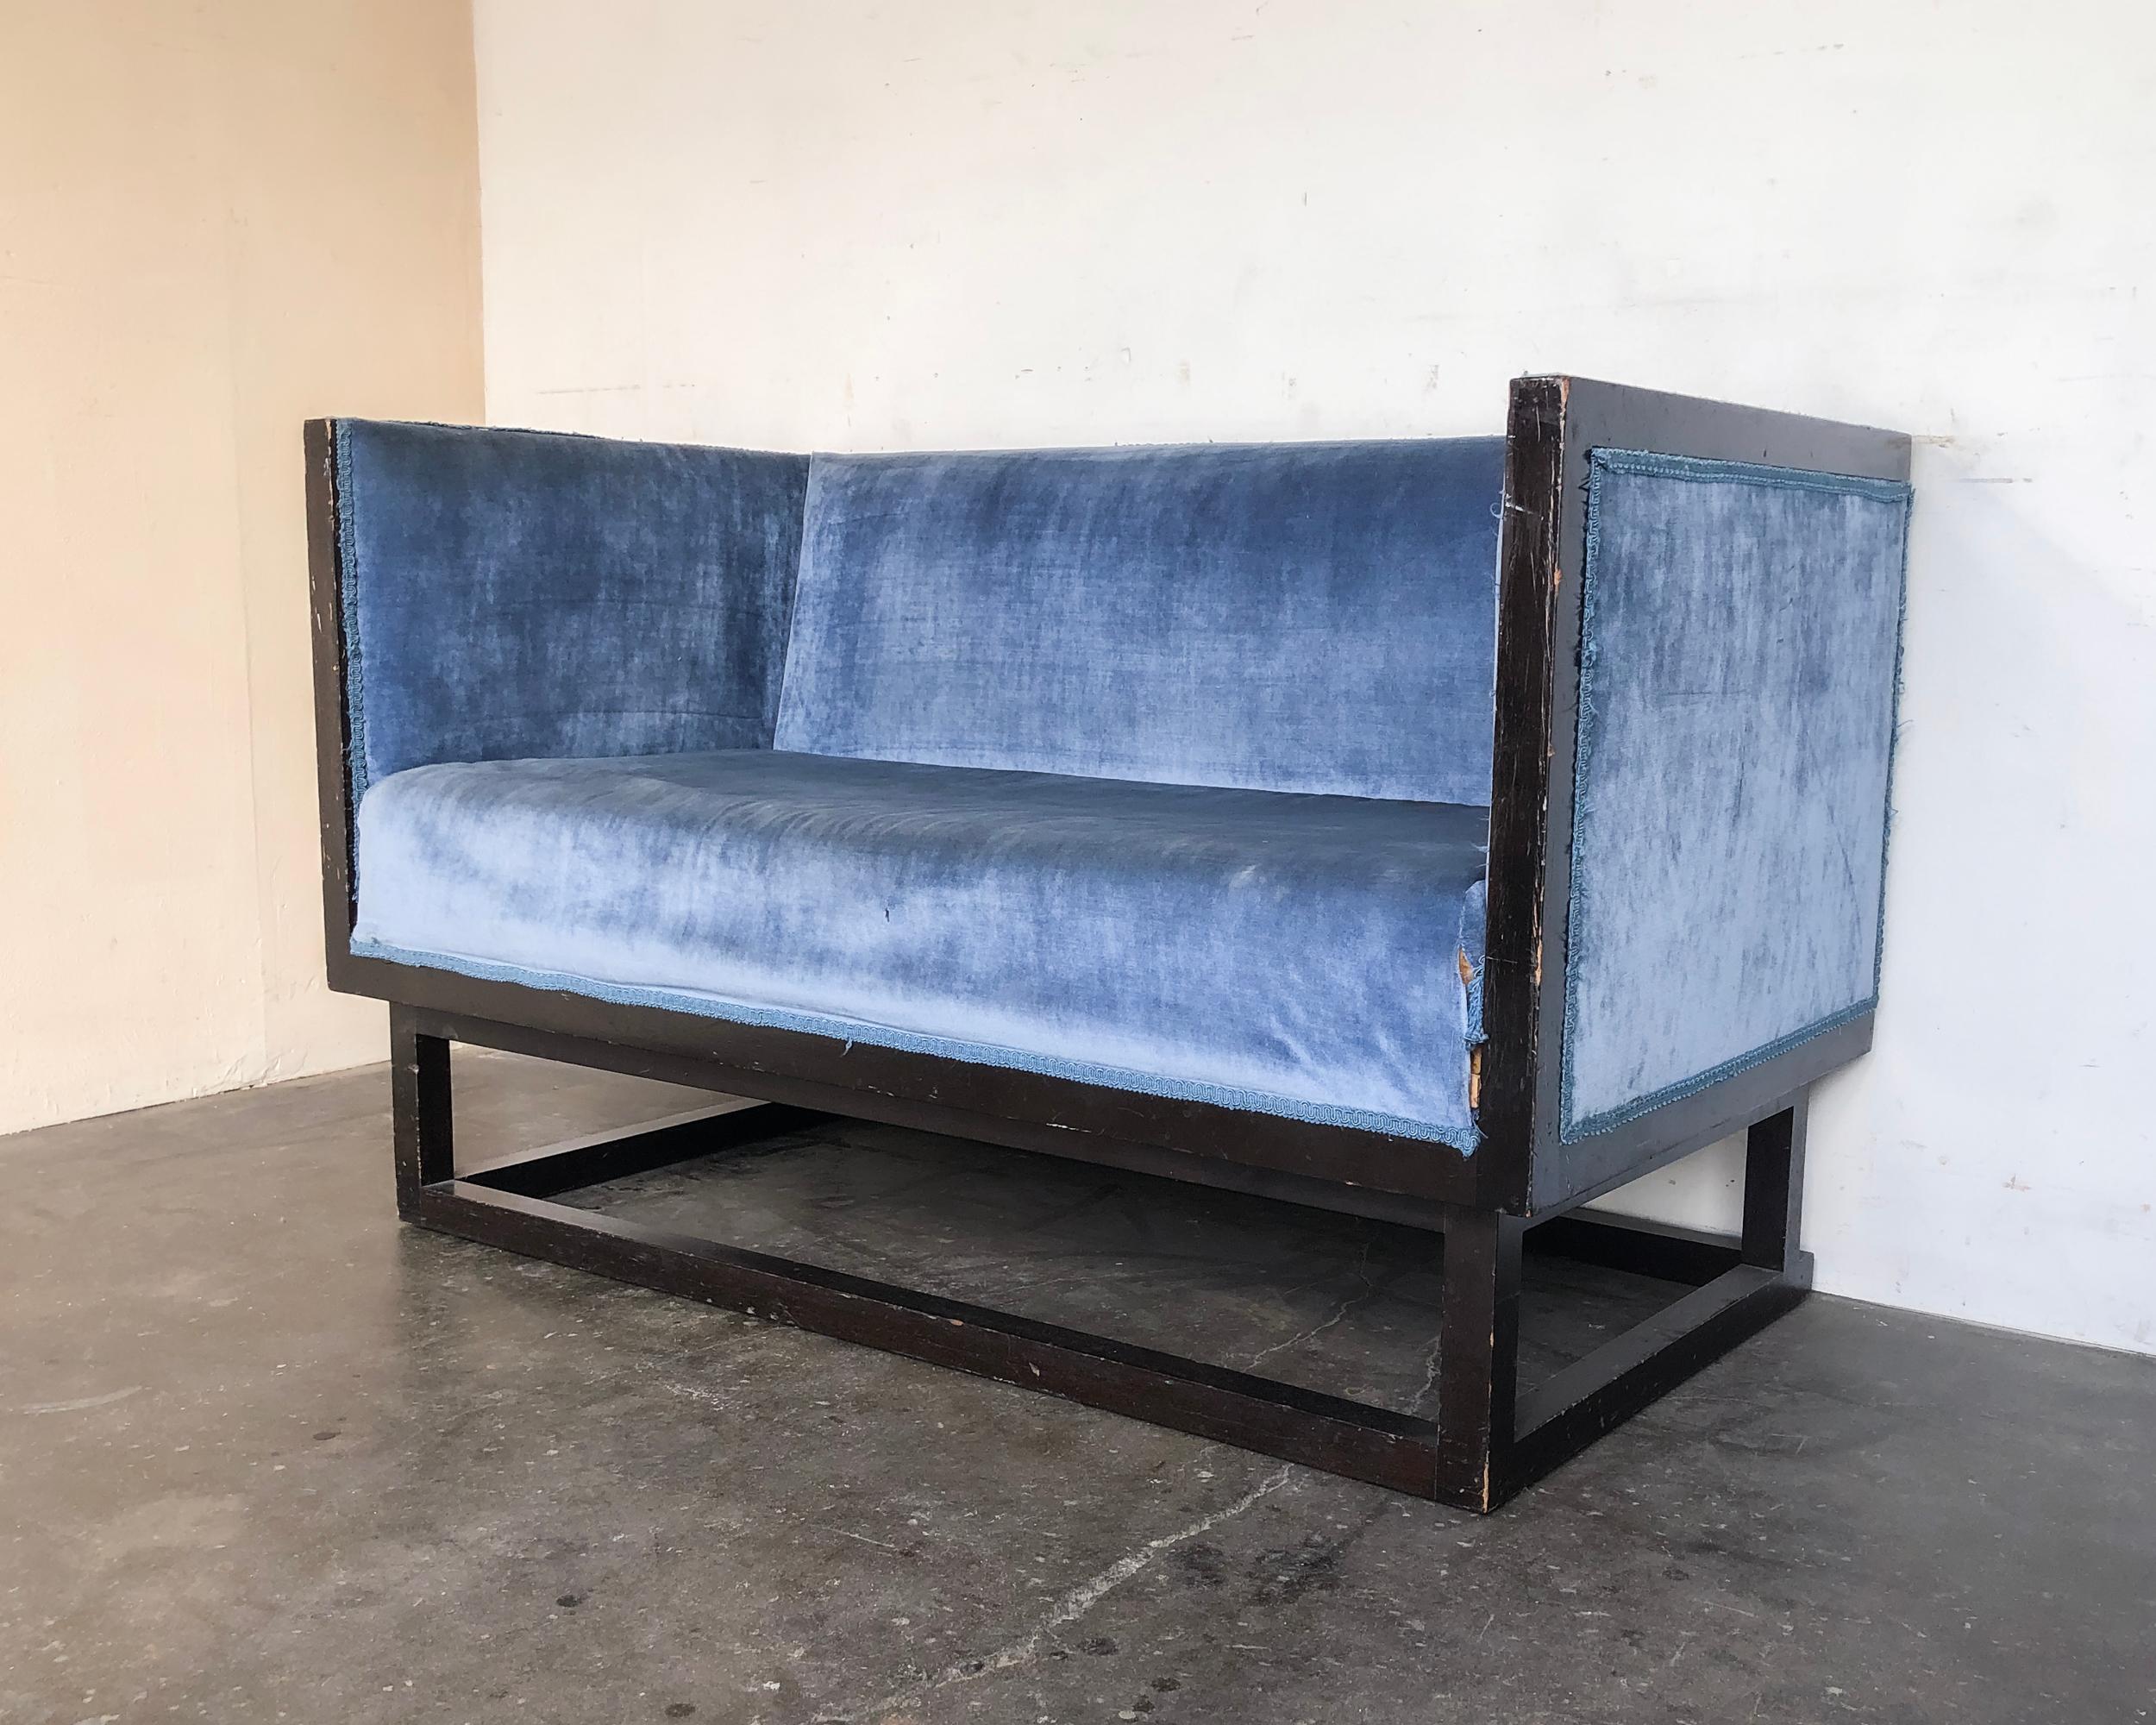 Rare original 'Cabinet Sofa' loveseat by Josef Hoffmann handmade circa 1980s by Wittmann Austria. Designed in 1903, for the Vienna home of Dr. Salzer, Josef Hoffmann's cabinet set is a timeless design. The rationalist cube form is made comfortable